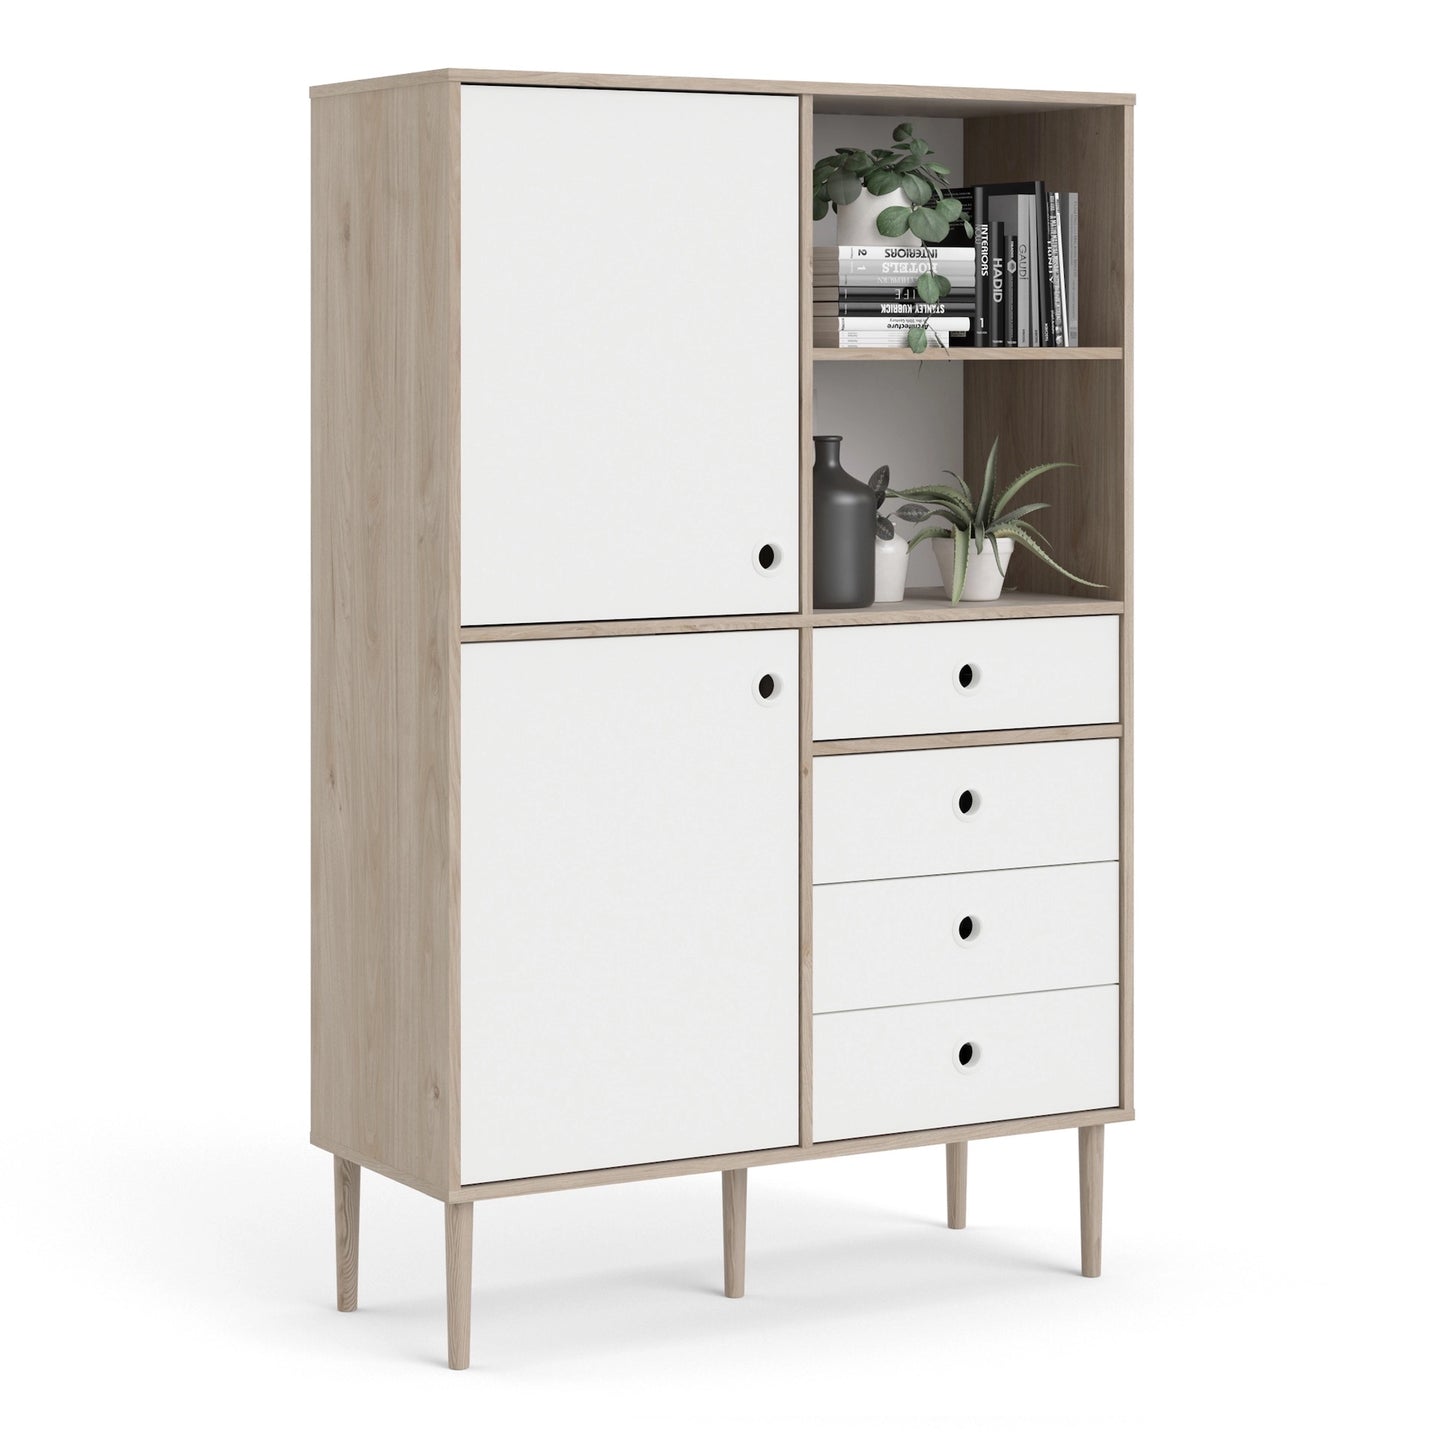 Furniture To Go Rome Bookcase 2 Doors + 4 Drawers in Jackson Hickory Oak with Matt White